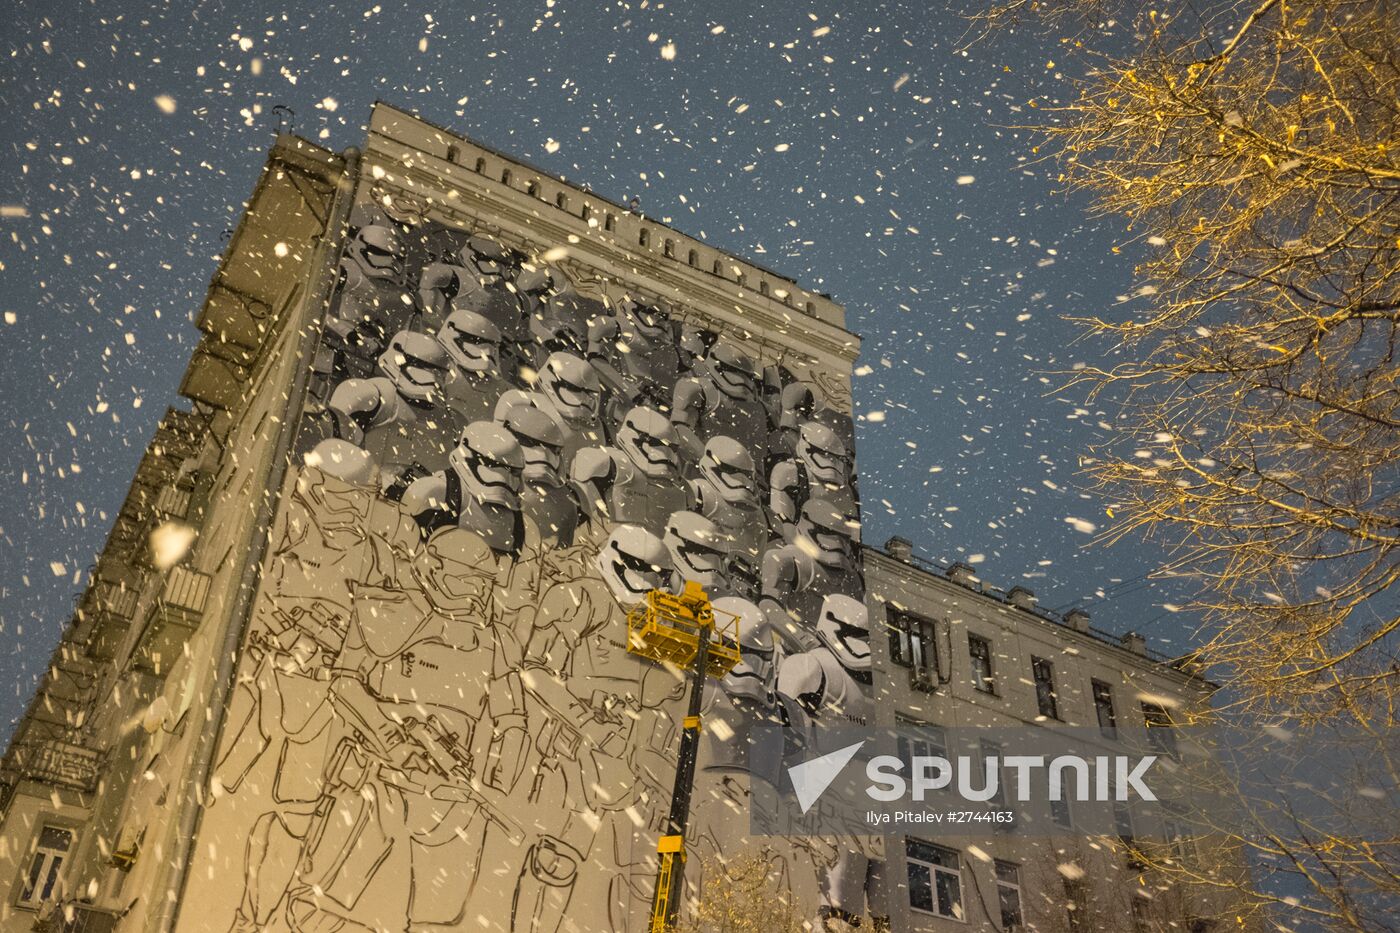 Star Wars graffiti appears in Moscow